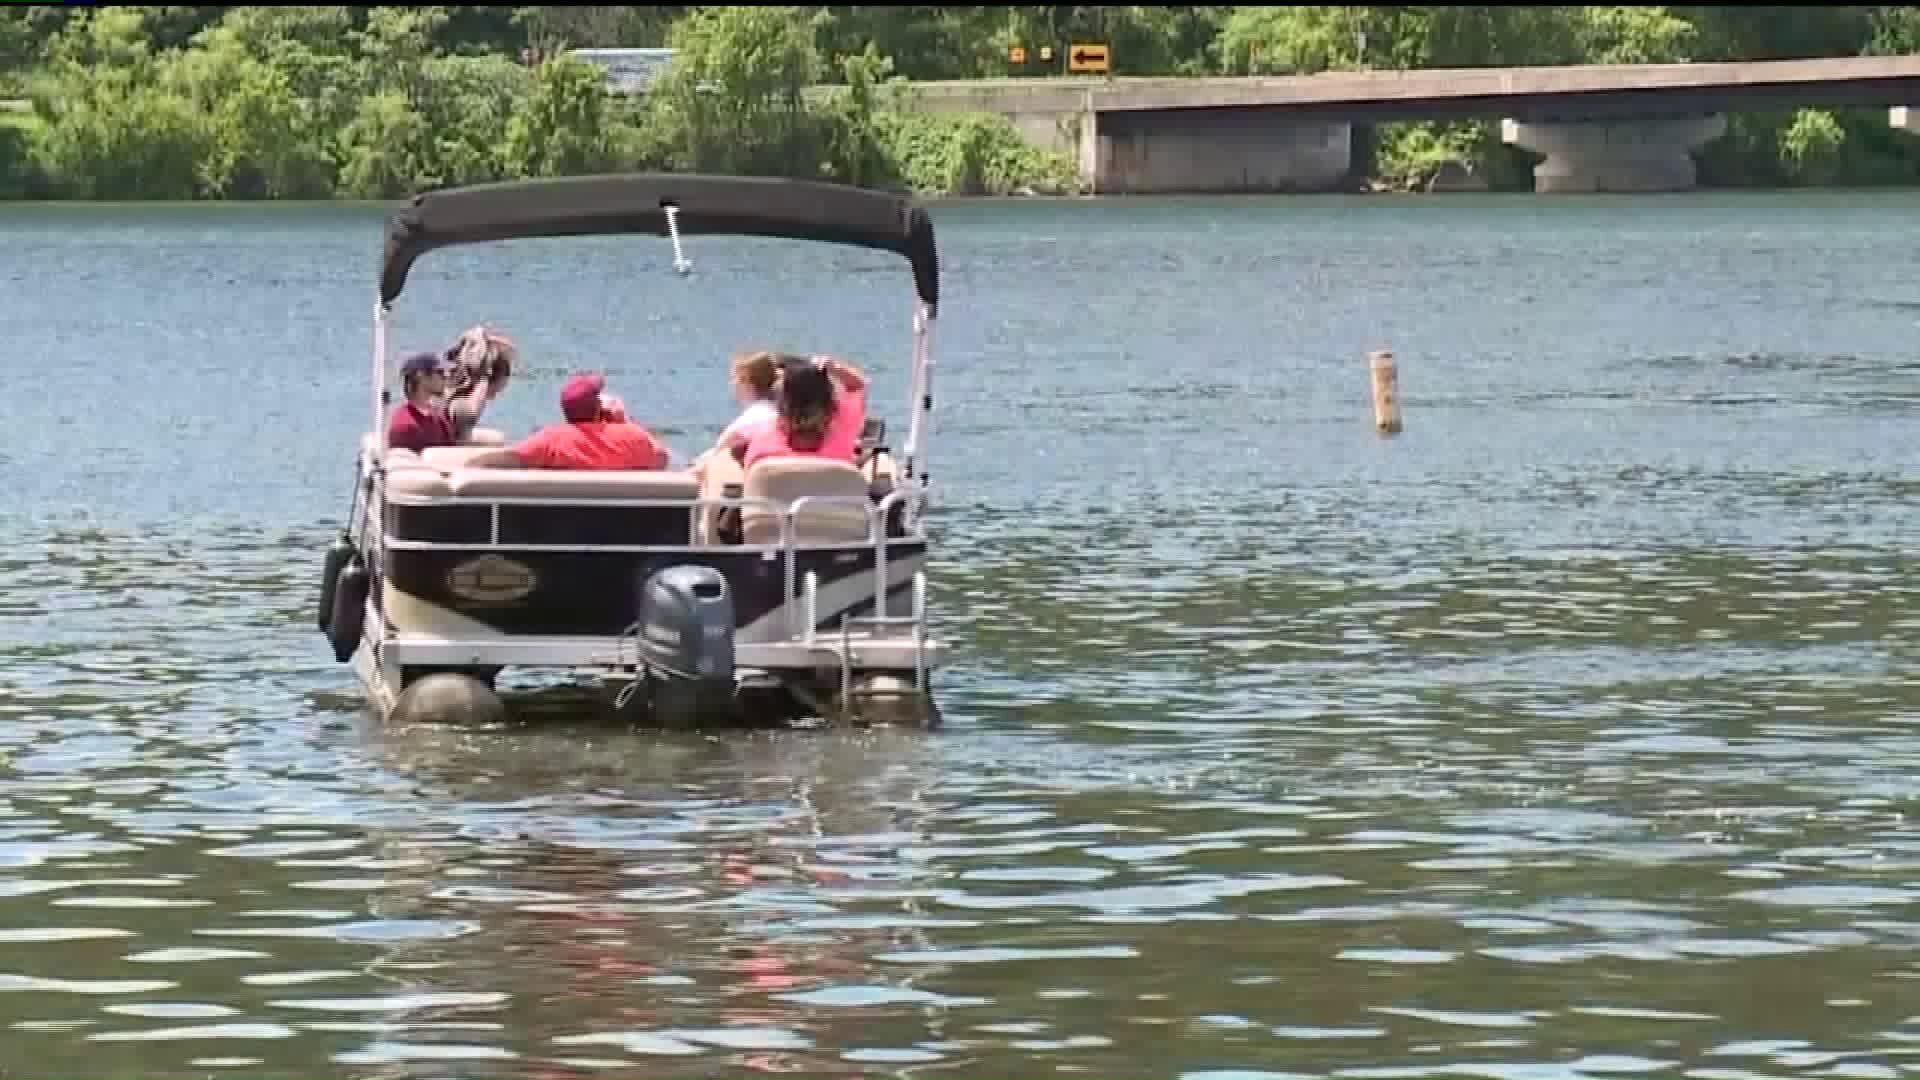 Plans for Memorial Day Along the Susquehanna River